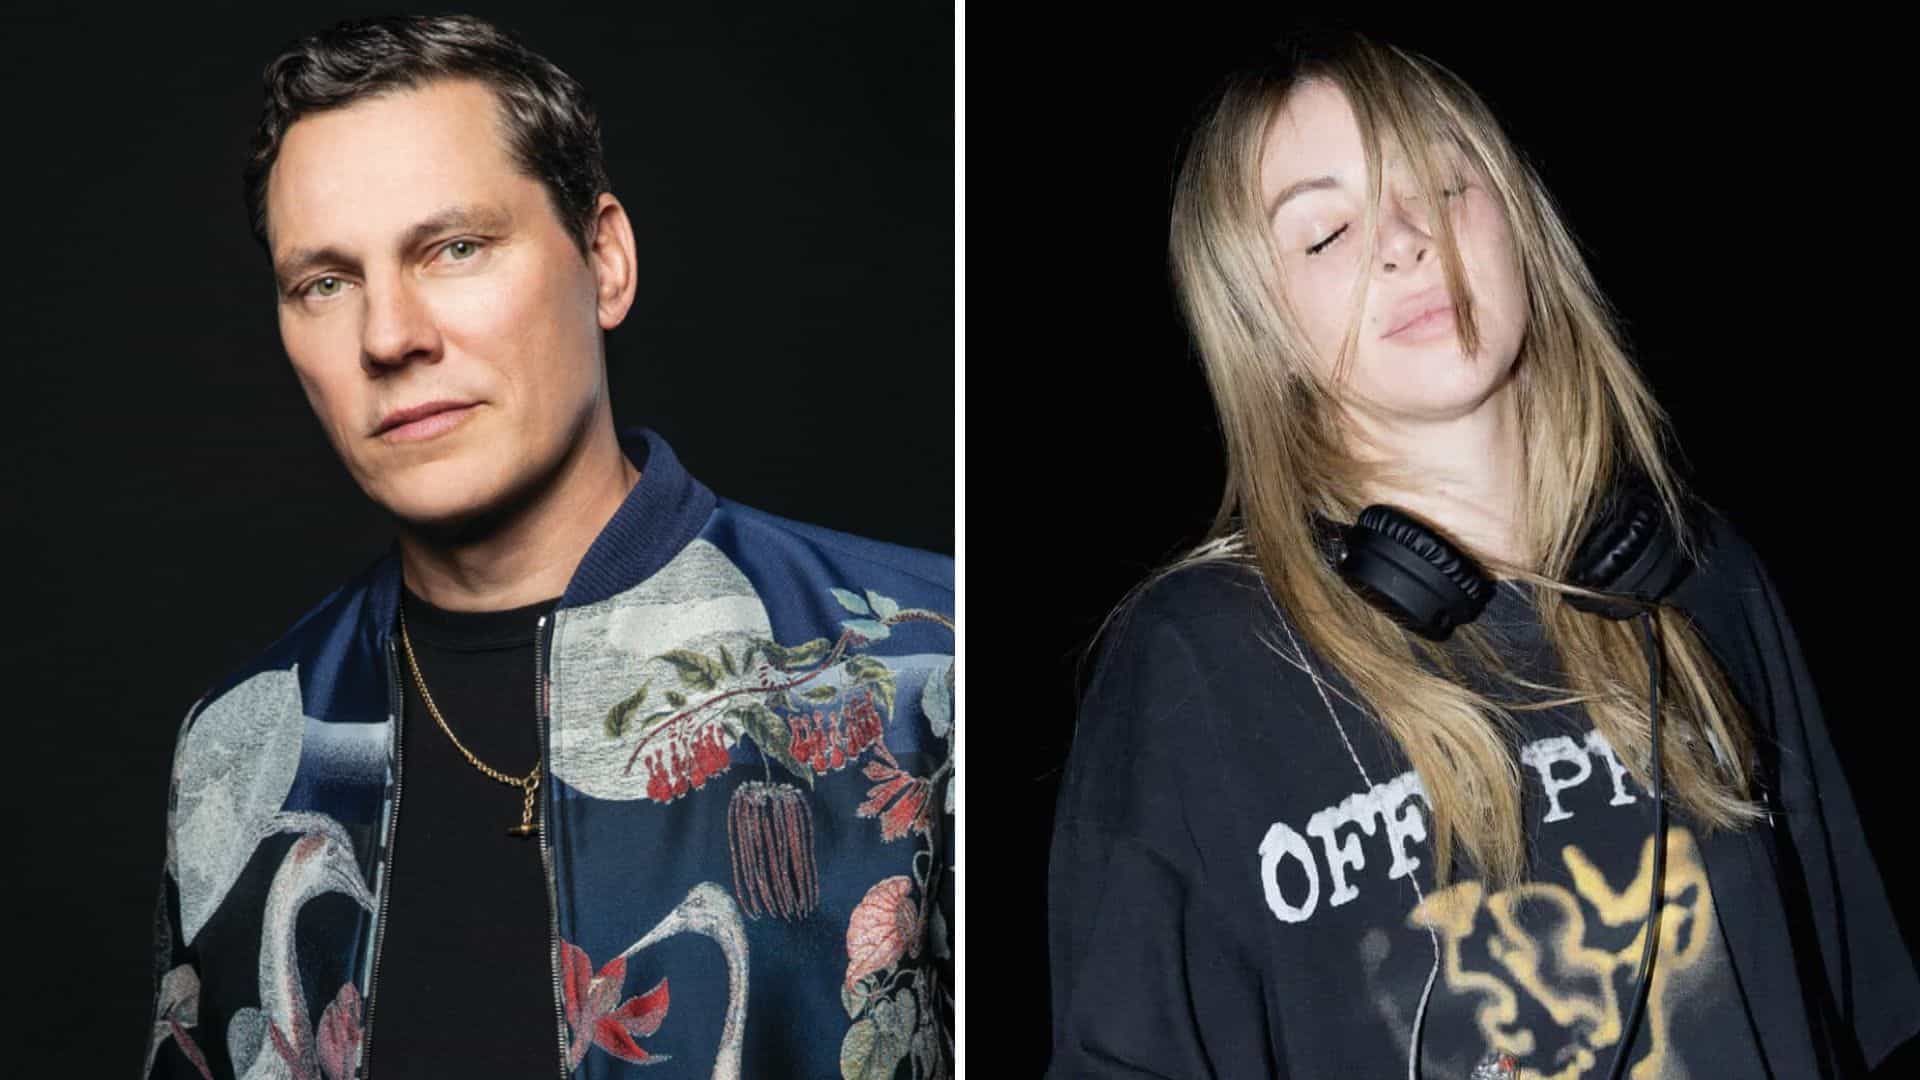 Alison Wonderland & Tiësto collaboration appears to be in the works